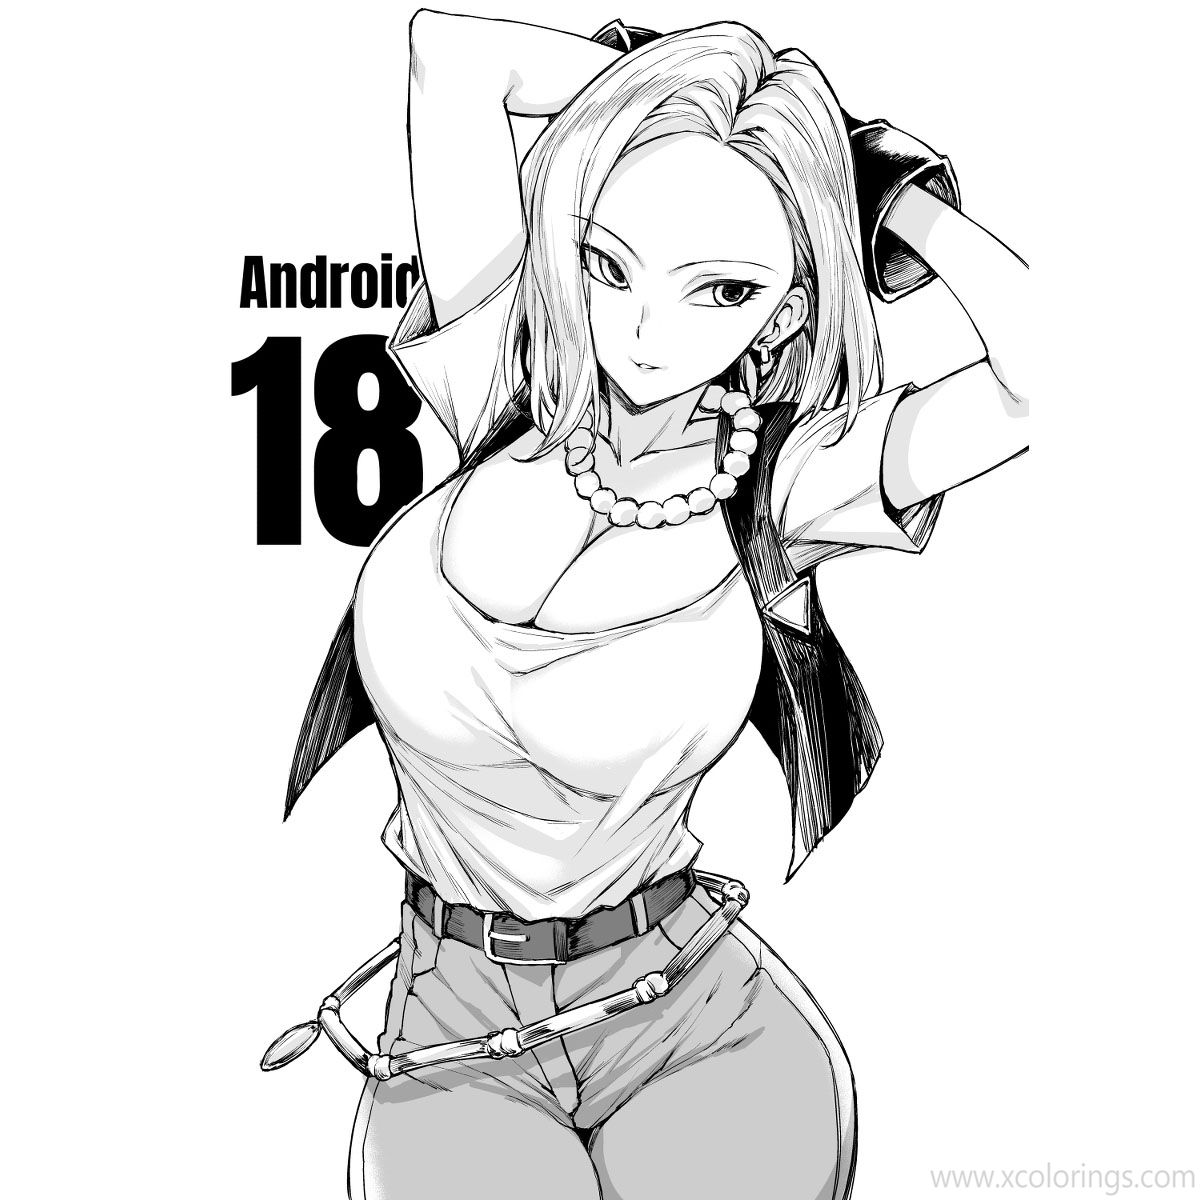 Free Android 18 Coloring Pages DBZ Fanart printable